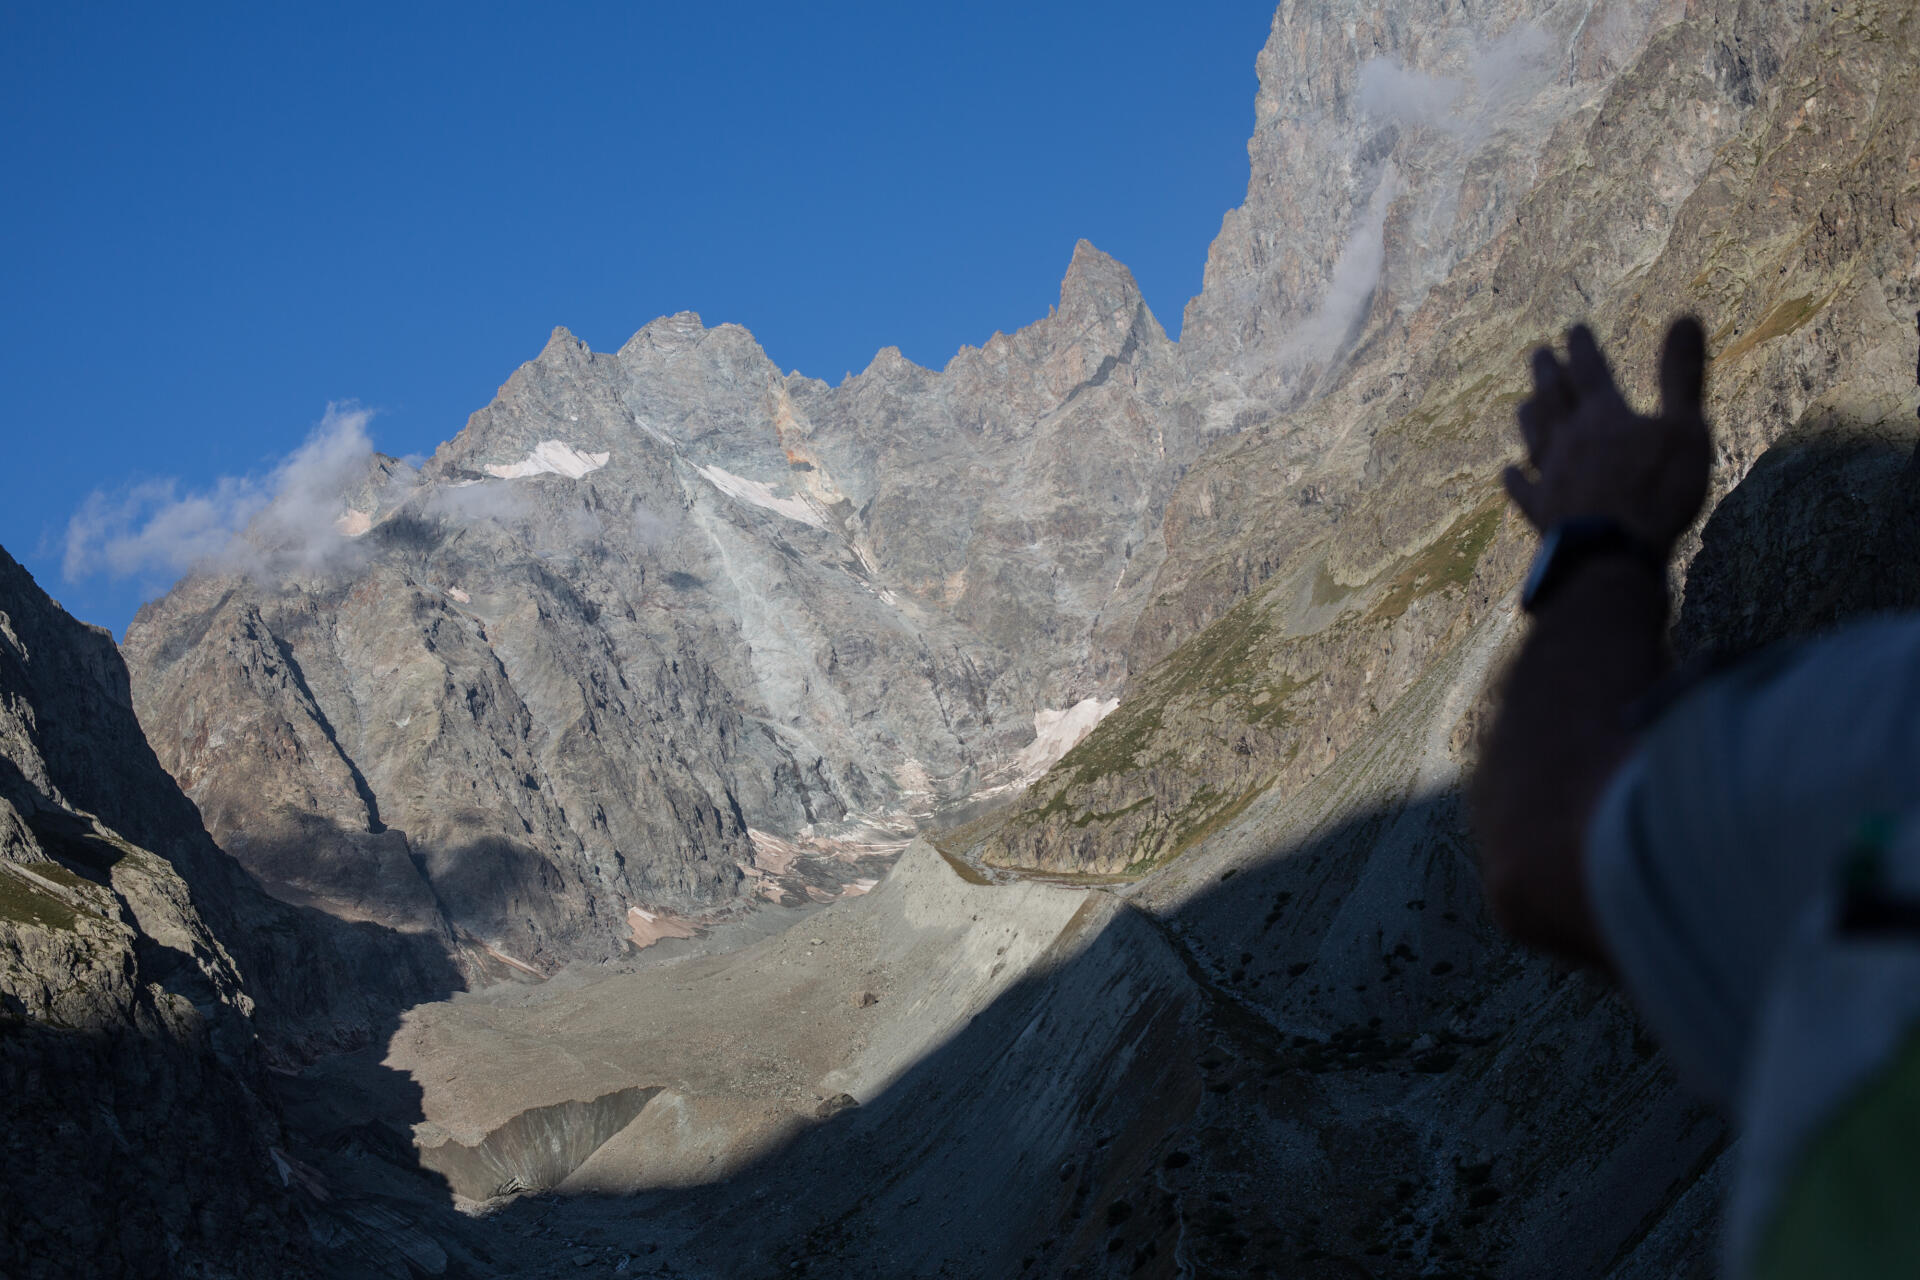 Thierry Maillet, heritage expert in the Ecrins national park, shows the Glacier Noir, of which a part is covered by stones, in the Hautes-Alpes on July 26.